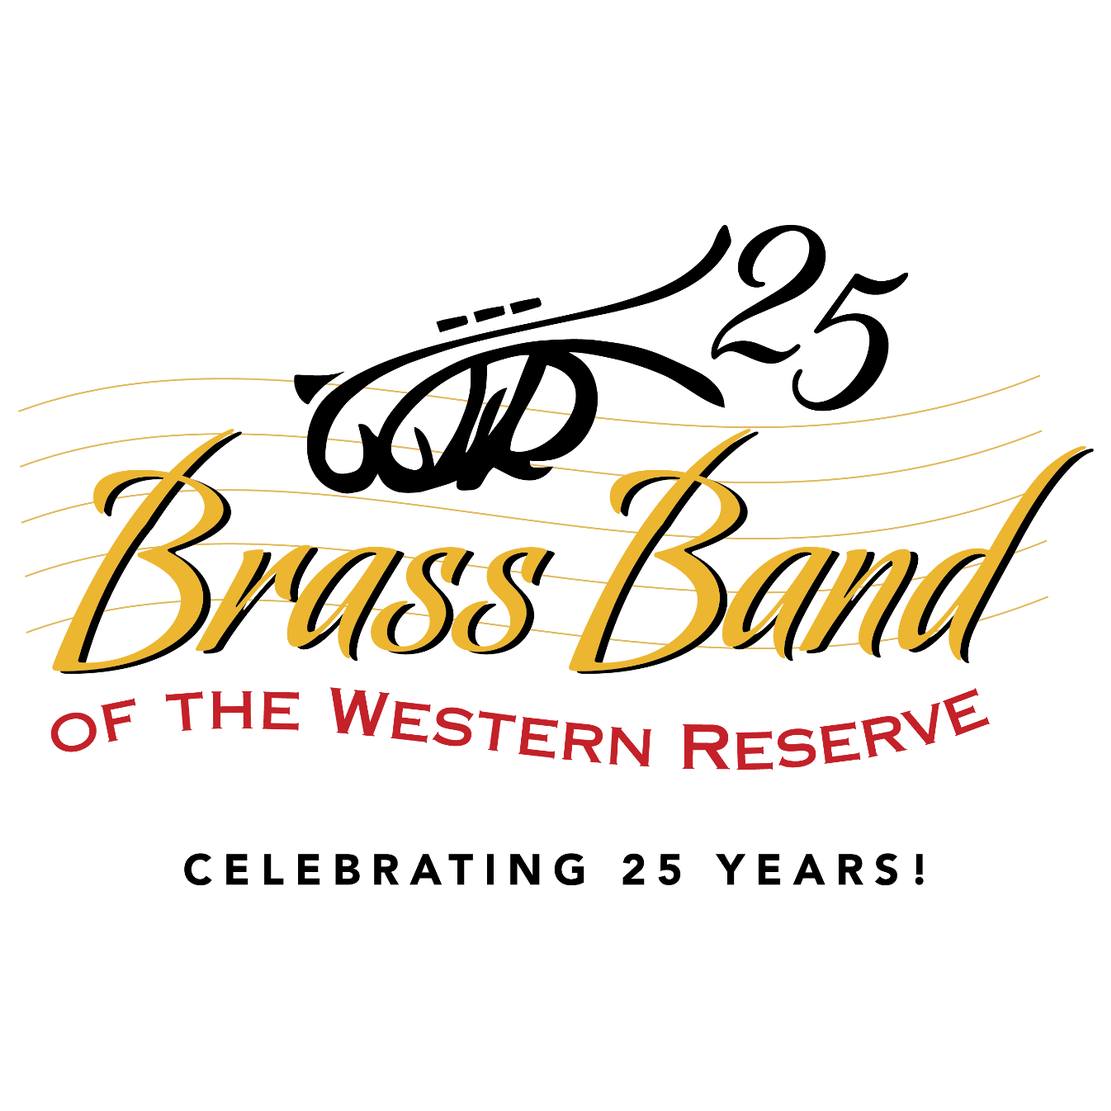 The logo for the Brass Band of the Western Reserve